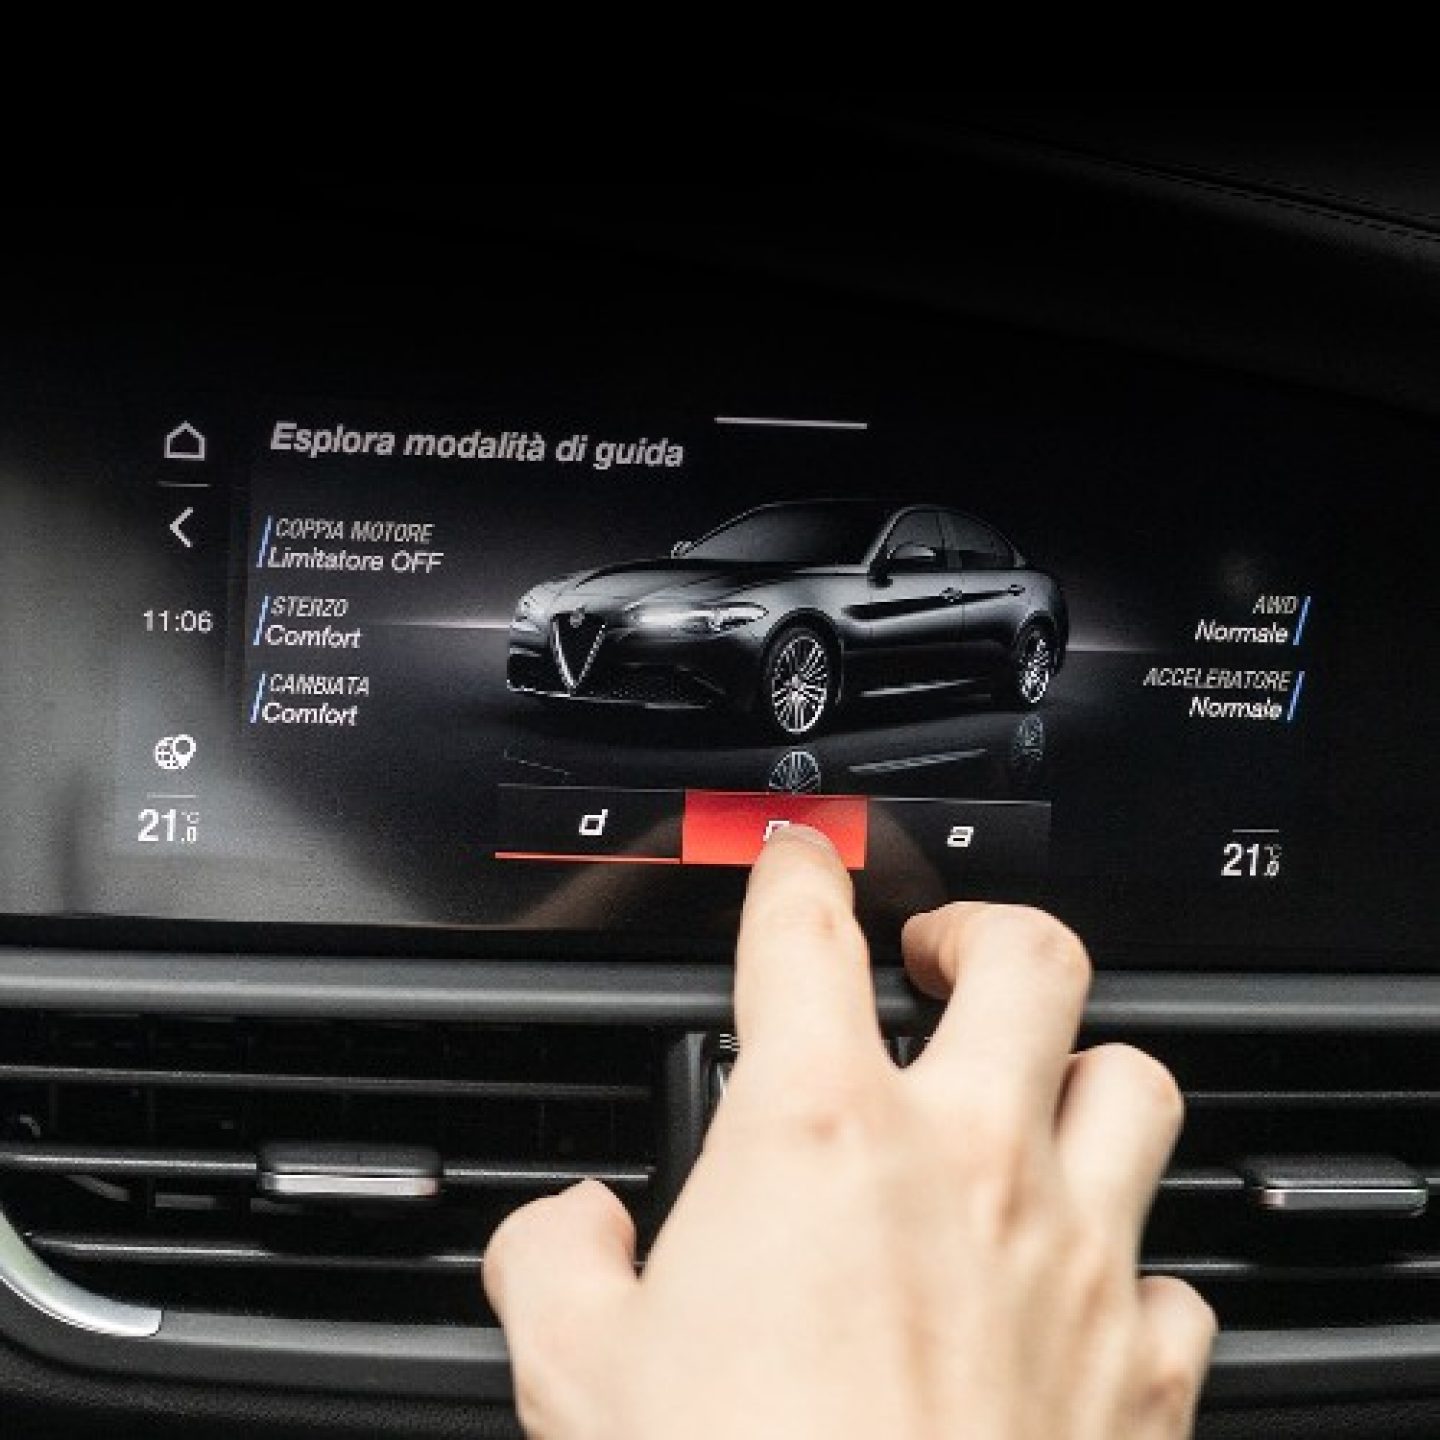 8.8” multi-touch display with interactive widgets